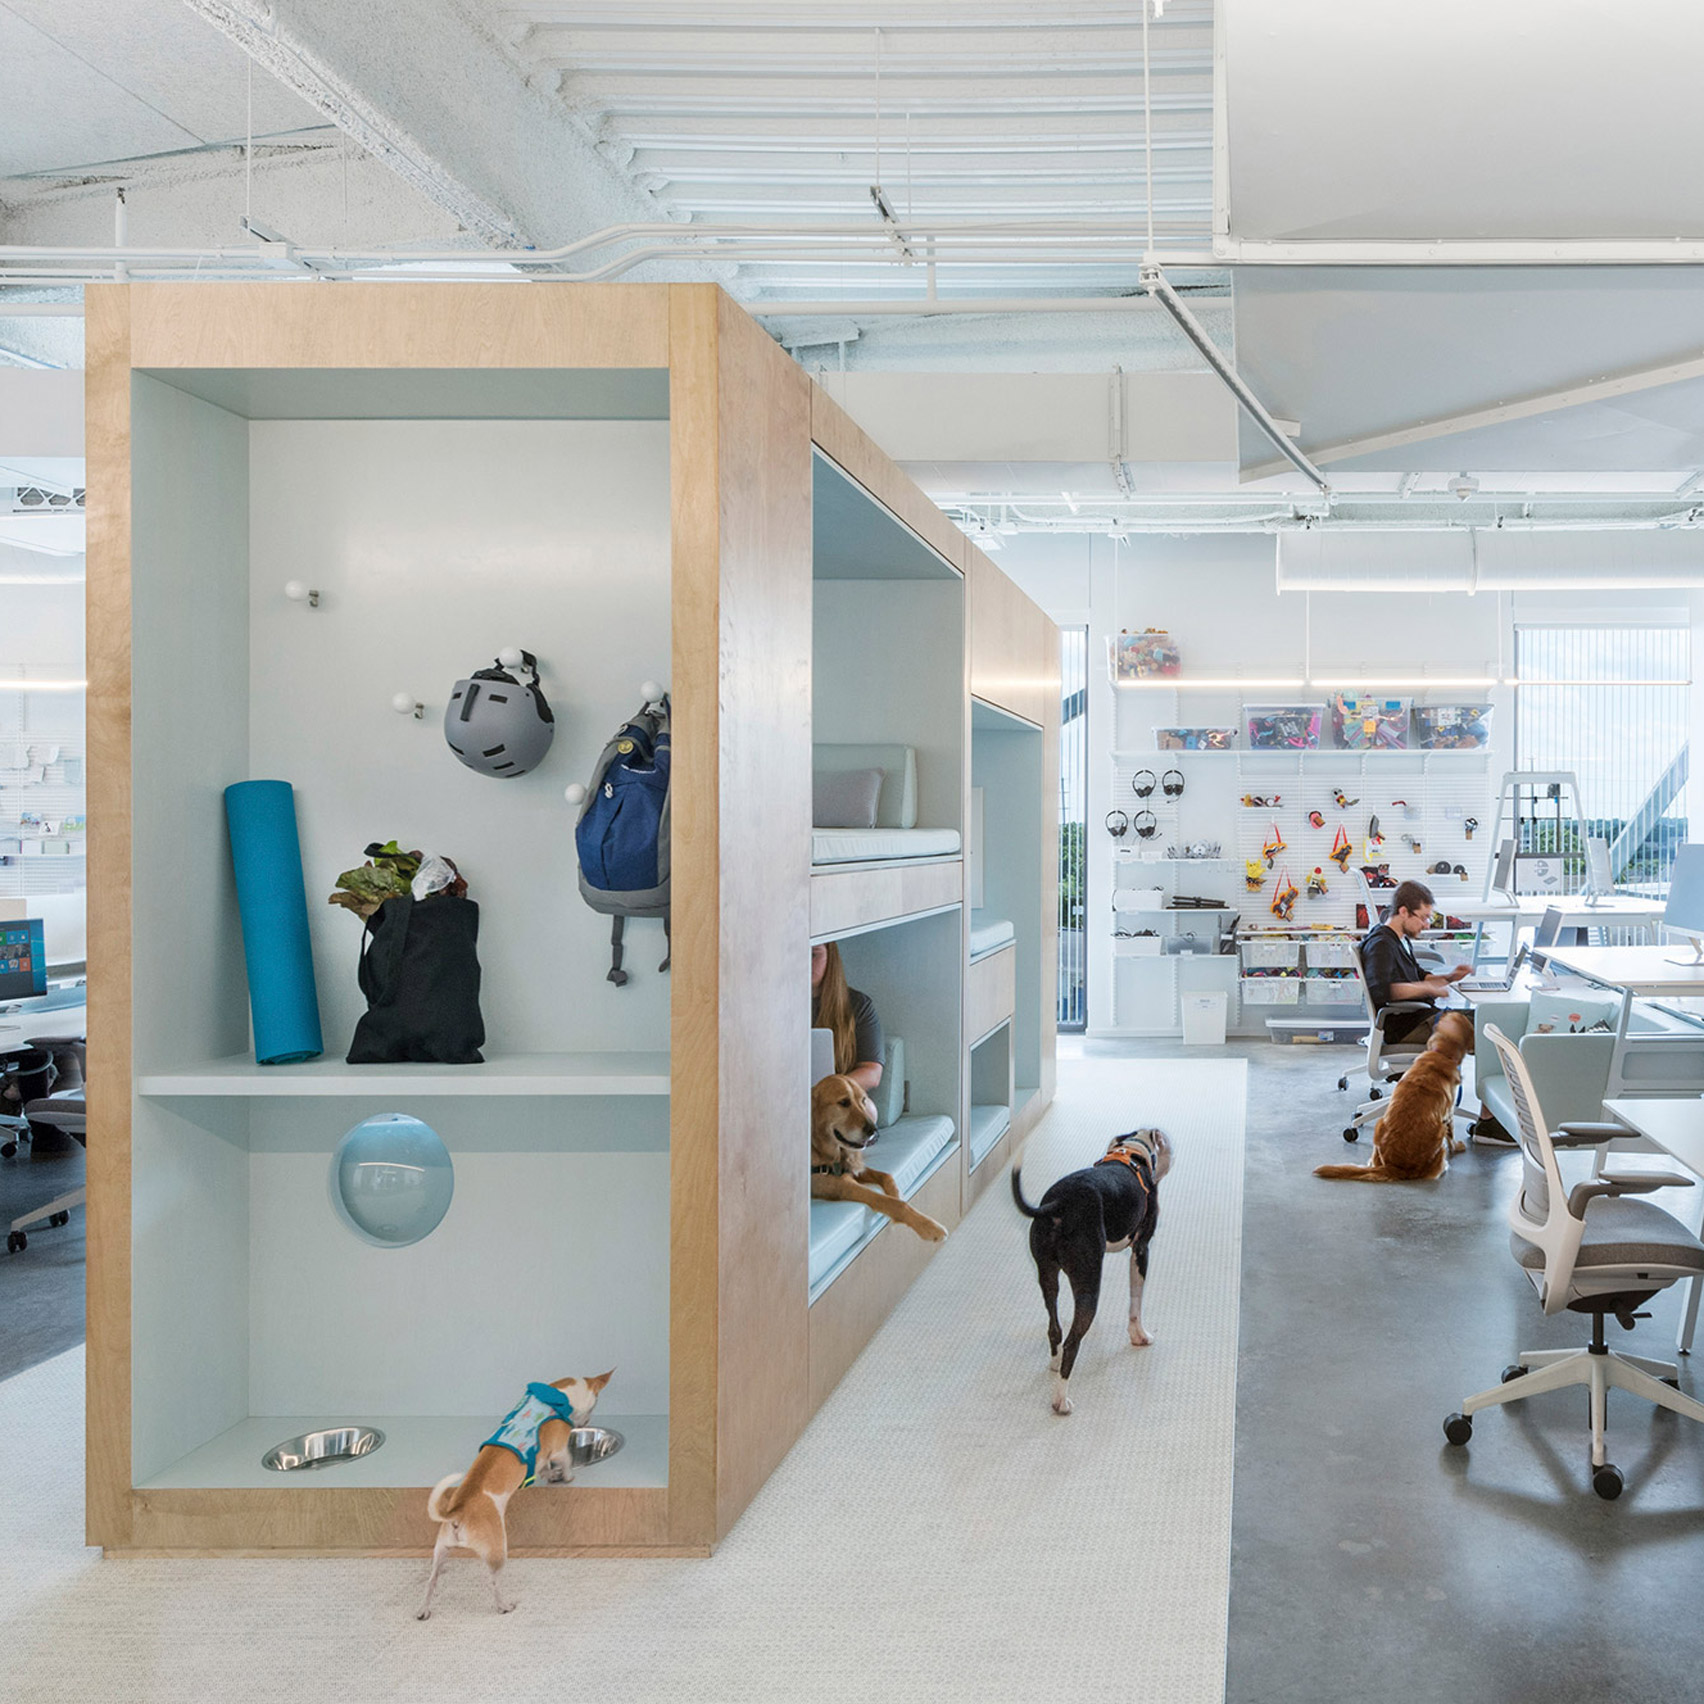 Nbbj Designs Bark S Ohio Office For Both Humans And Dogs